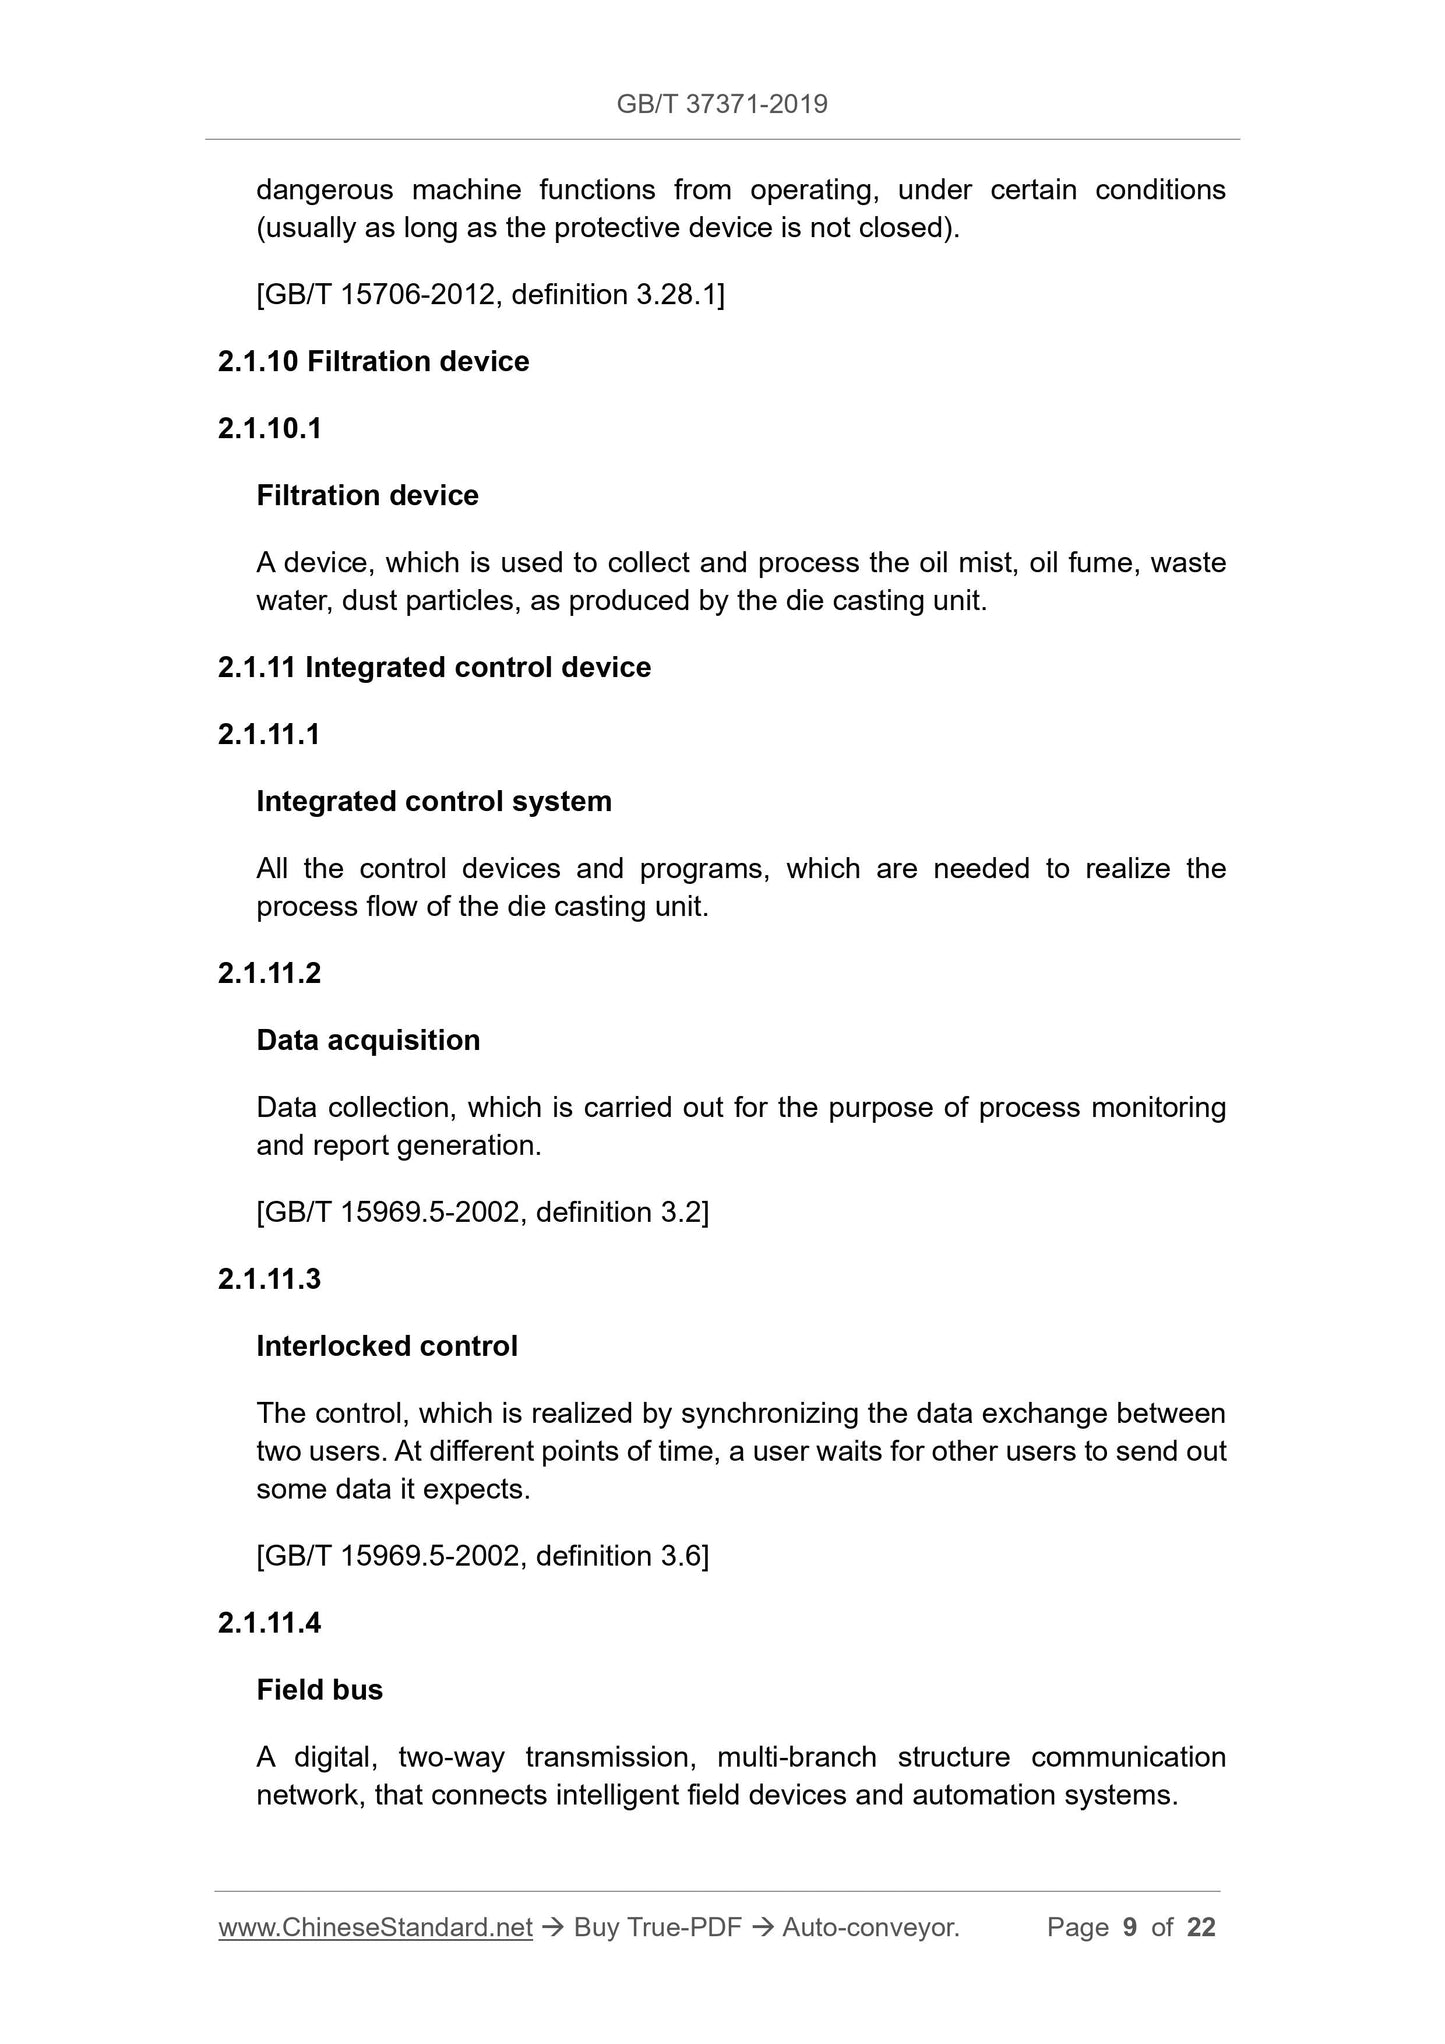 GB/T 37371-2019 Page 5